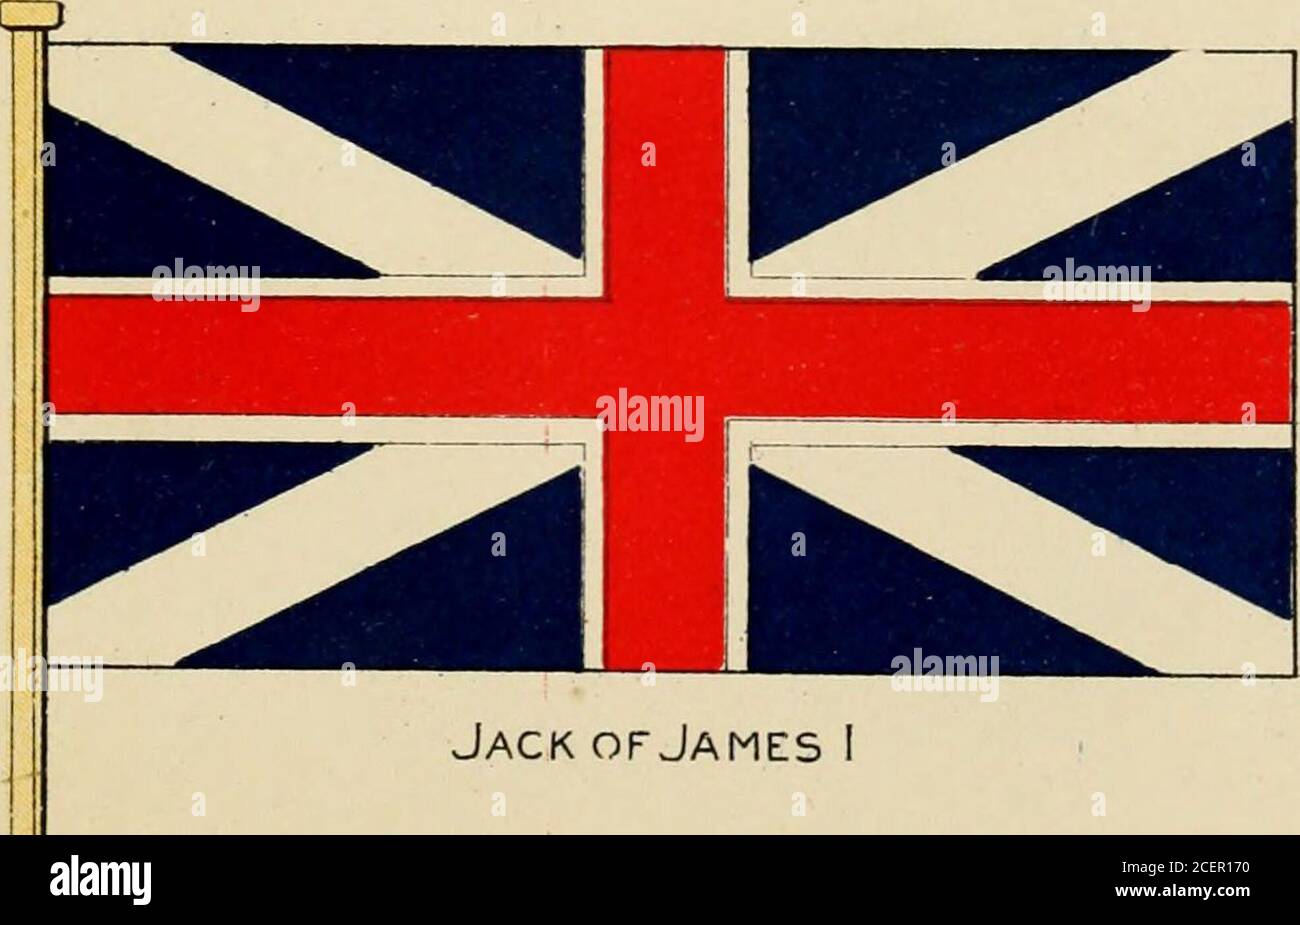 . The story of the Union Jack; how it grew and what it is, particularly in its connection with the history of Canada. 2. Jack of James I The Scotch Jack. 65 This Scotch Jack (PL iv., fig. 2), which isdescribed in heraldic language as Azure, aSaltire air/euf (on azure blue, a silver-whiteSaltire), was the flag carried by the greatScottish national hero, Robert-the-Bruce,whose valour won for him the crown of Scot-land, and Avhose descendants, the Earls ofElgin, still bear his banner on their coat-of-arms. At Bannockburn, in 1314, this emblemof Bruce rose victorious over Edward II. andhis stolid Stock Photo